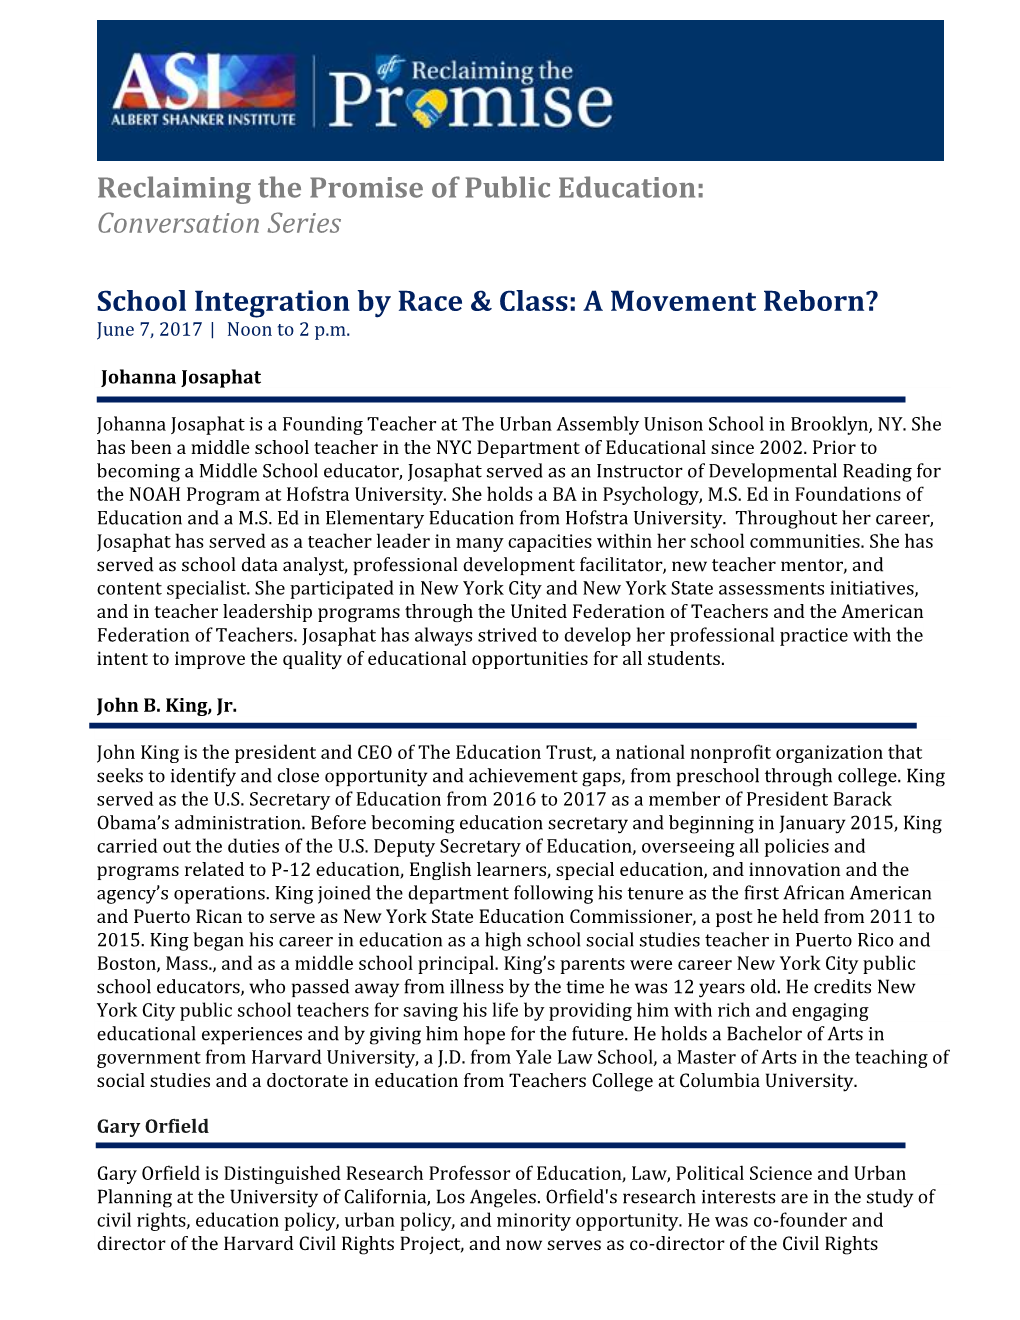 Reclaiming the Promise of Public Education: Conversation Series